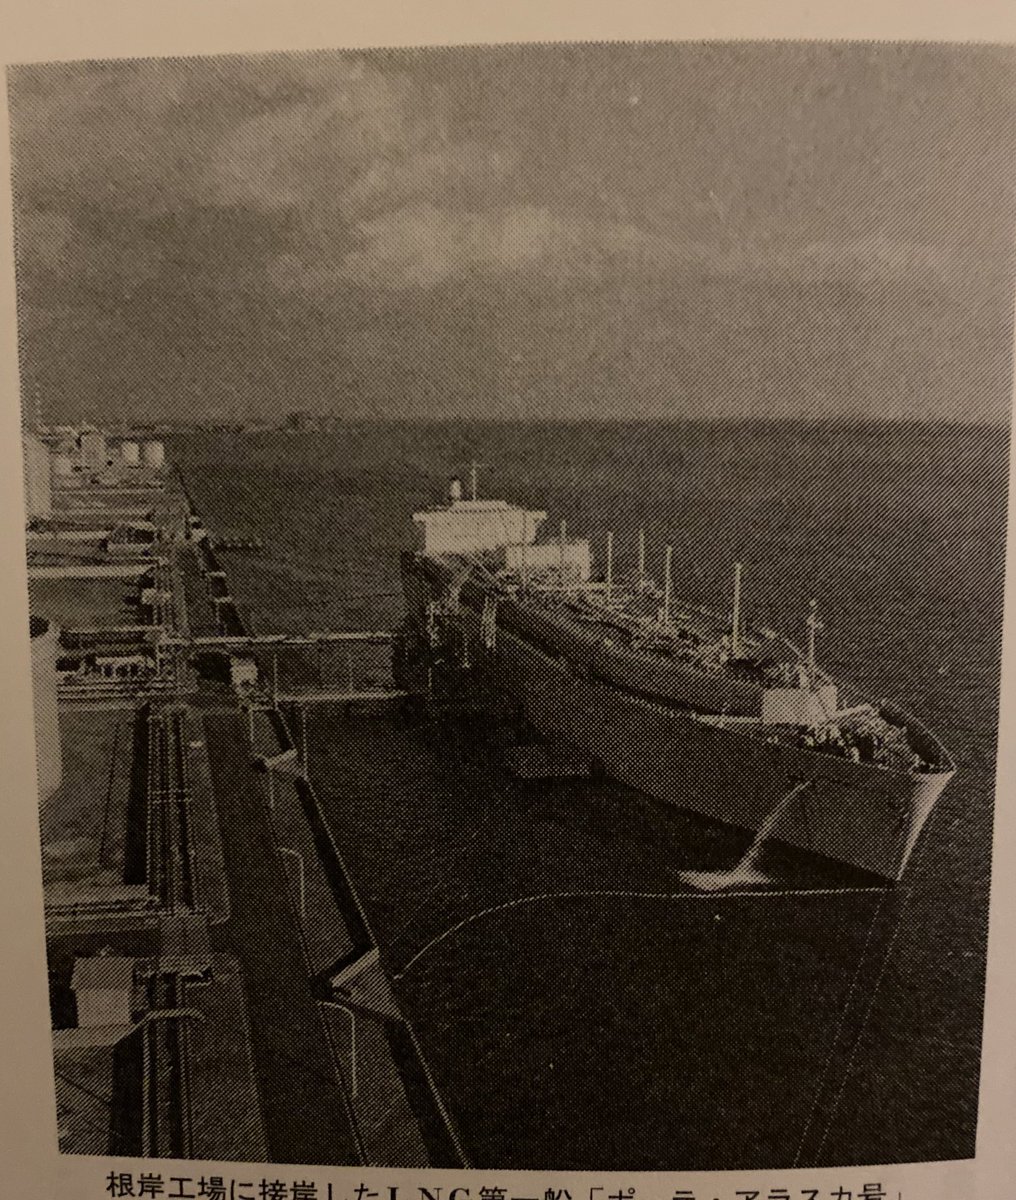 On November 4, 1969, the first cargo from Alaska arrived at the Negishi import terminal. The cargo was shipped on the “Polar Alaska” vessel.Tokyo Gas was supplying /actual/ natural gas to its customers on a large scale for the first time since its founding in 1885